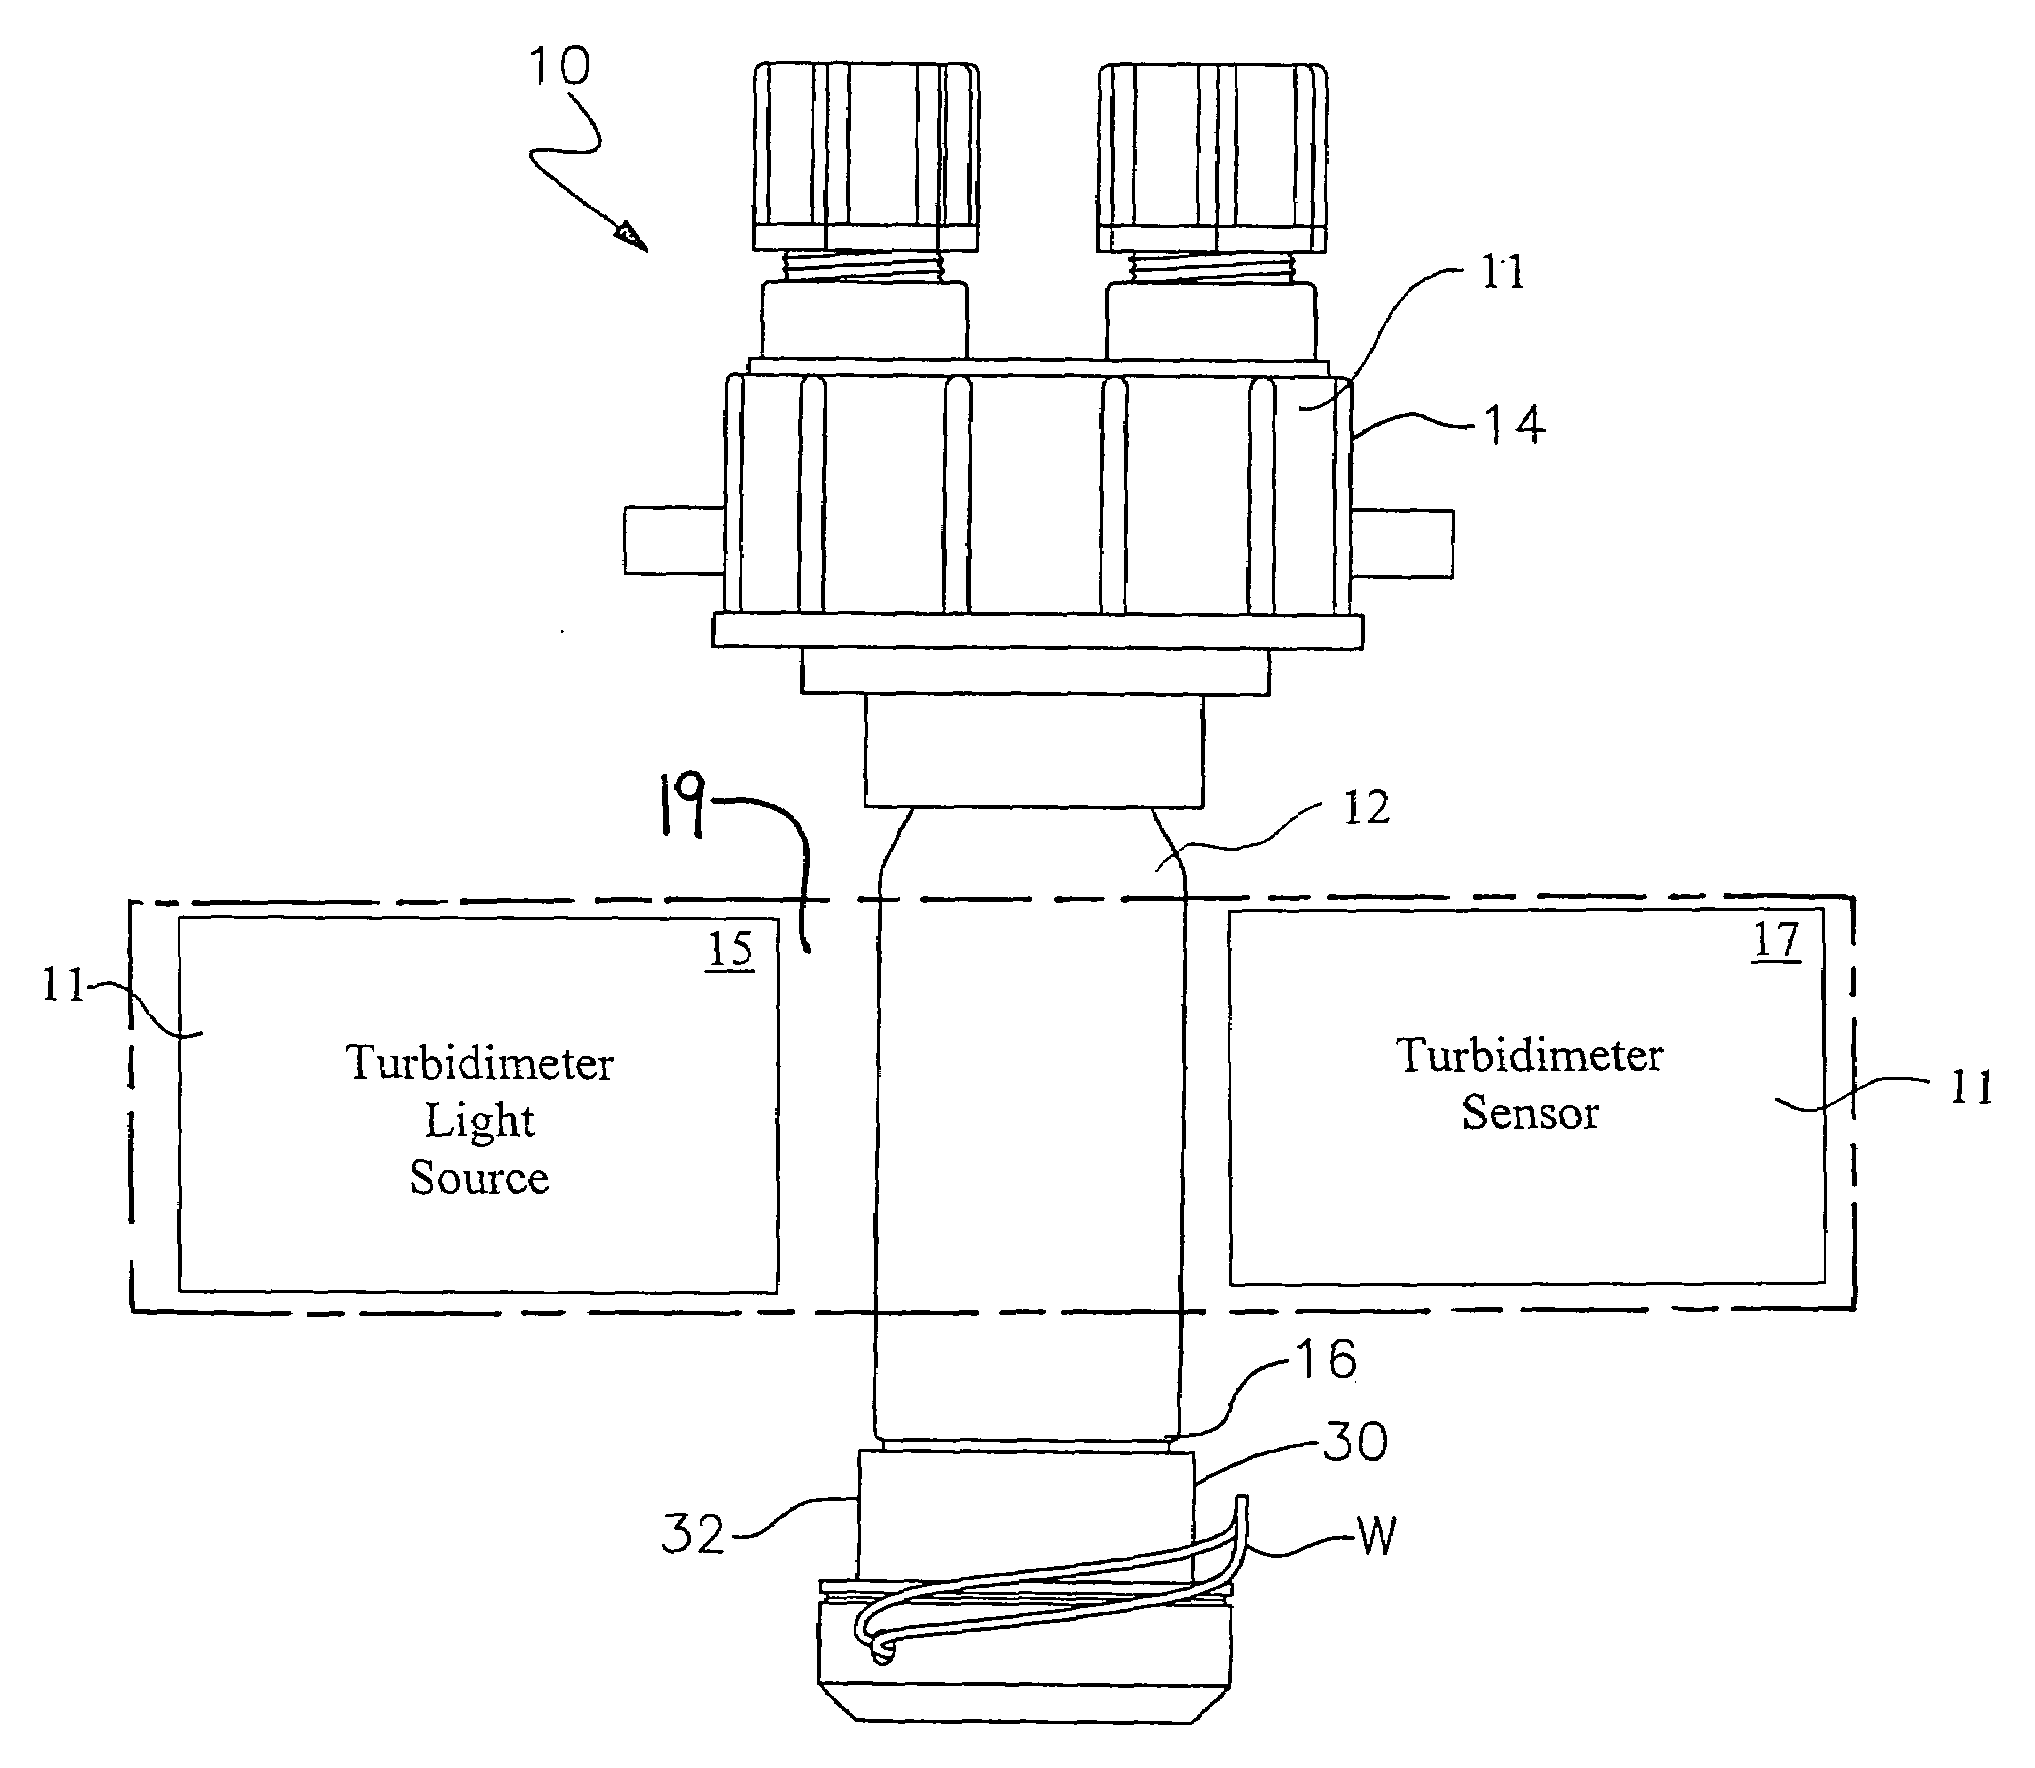 Turbidimeter with ultrasonically cleaned components